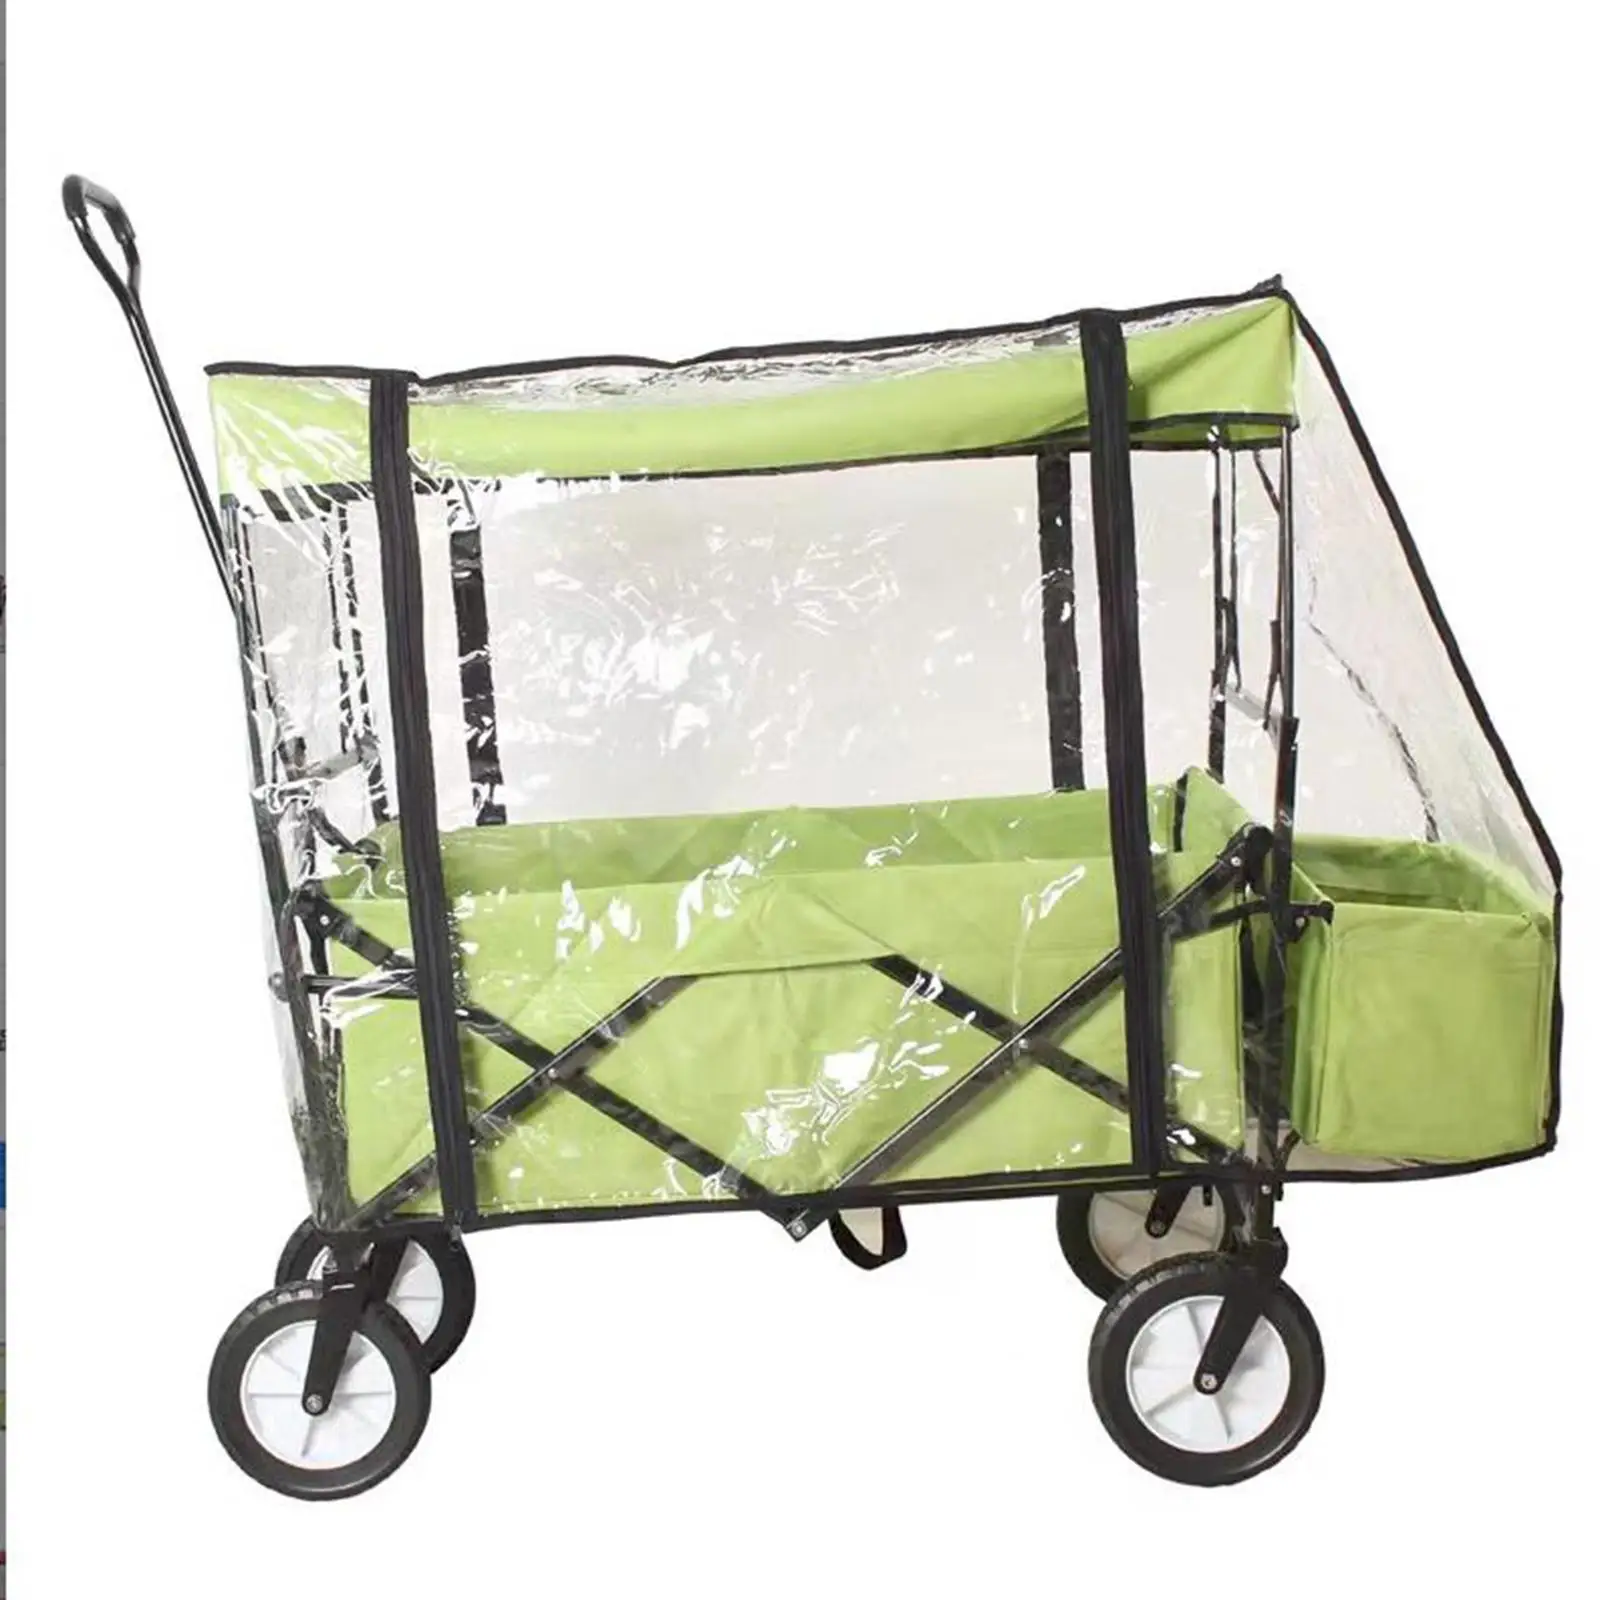 Collapsible Wagon Cart Waterproof Cover Canopy PVC Material Durable 85x40x70cm Dustproof for Folding Wagons with Metal Frame